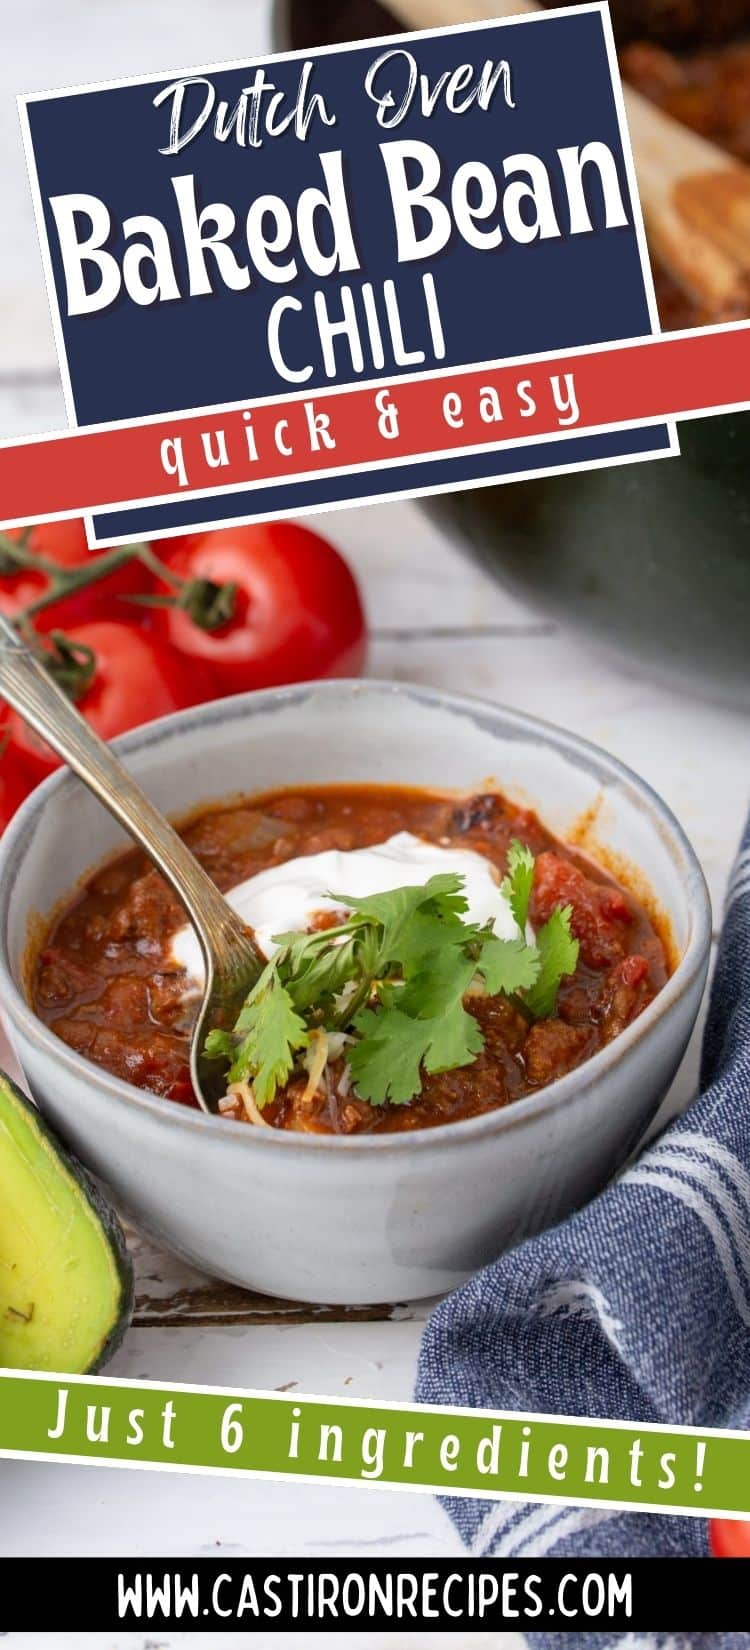 Dutch Oven Baked Bean Chili Pin